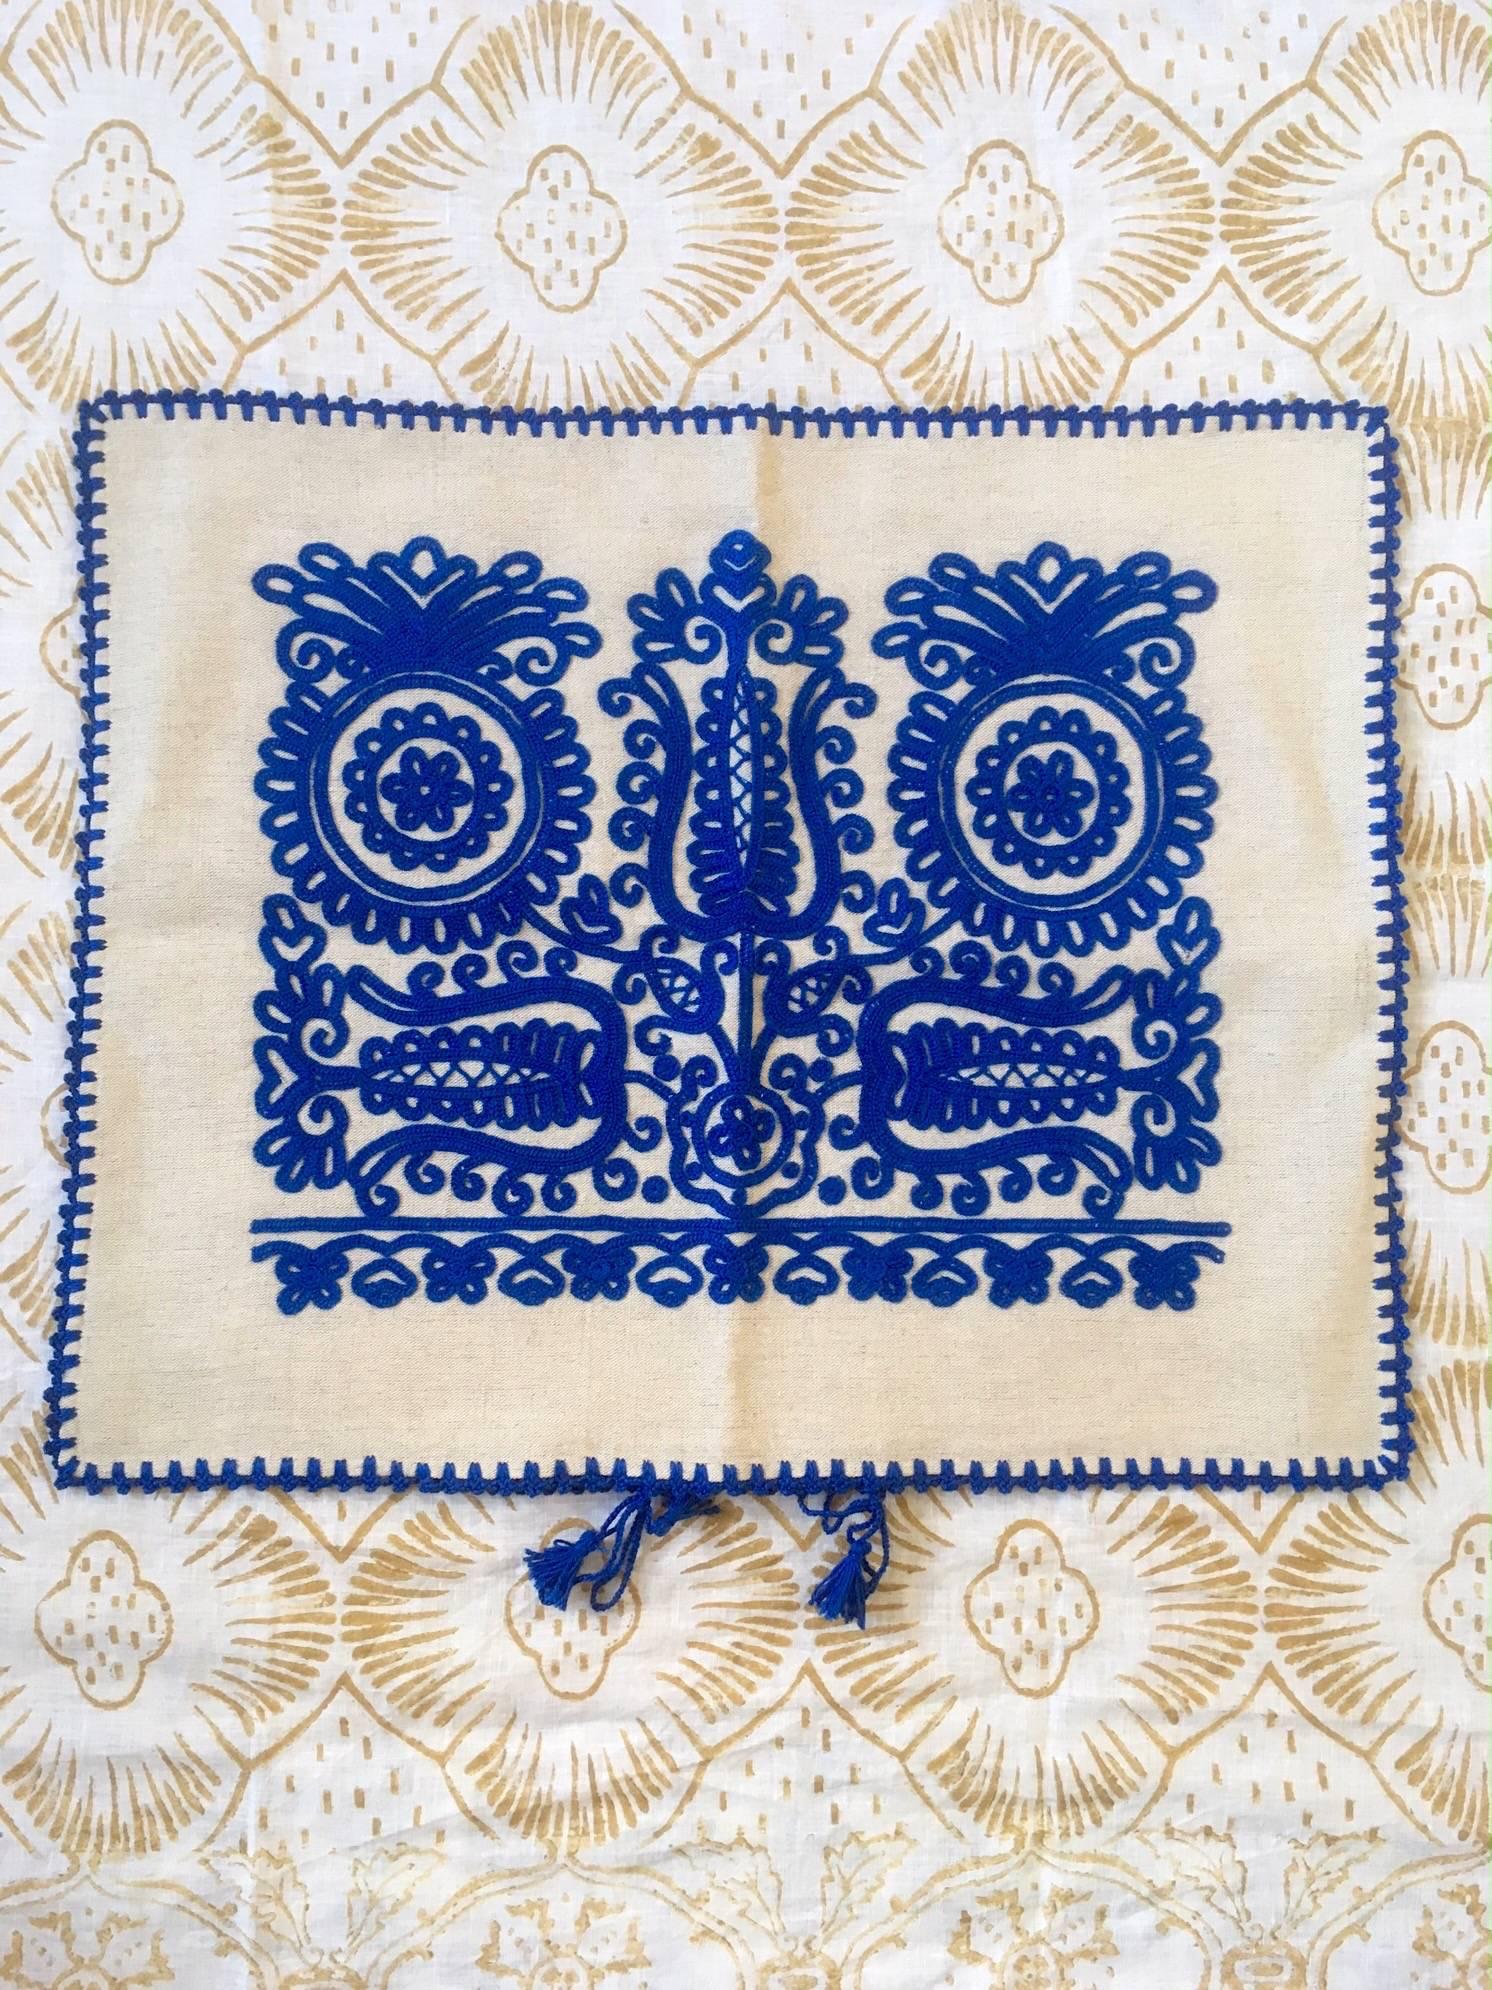 Transylvanian embroidered blue cushion cover
Embroidered by hand in the traditional way in Transylvania.
It comes with polyester pillow insert.

It can be ordered in any quantity.